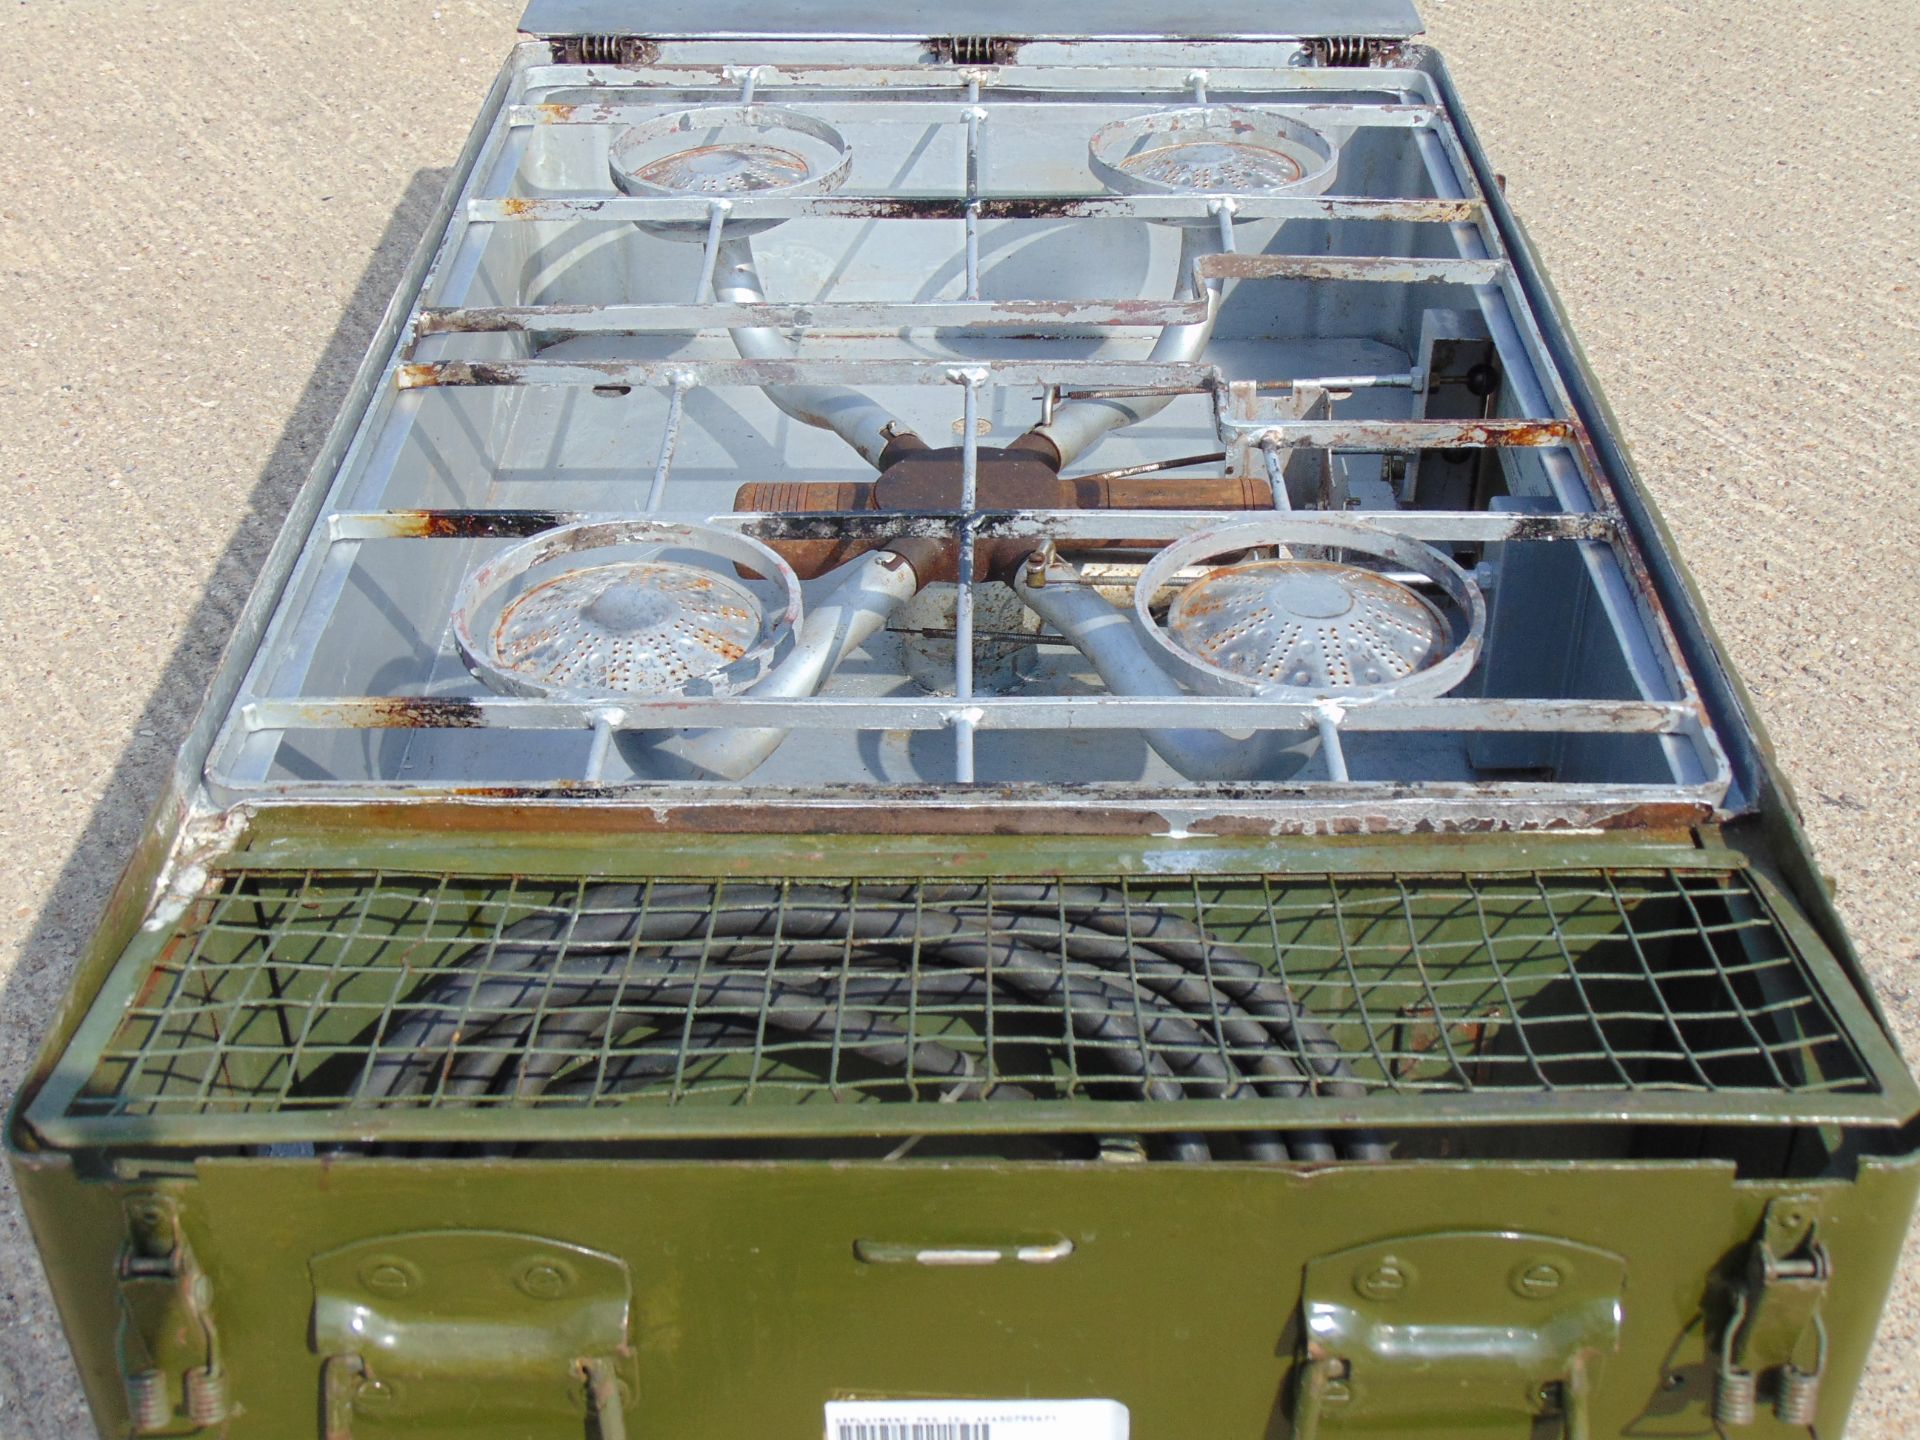 Field Kitchen No5 4 Burner Propane Cooking Stove - Image 2 of 9